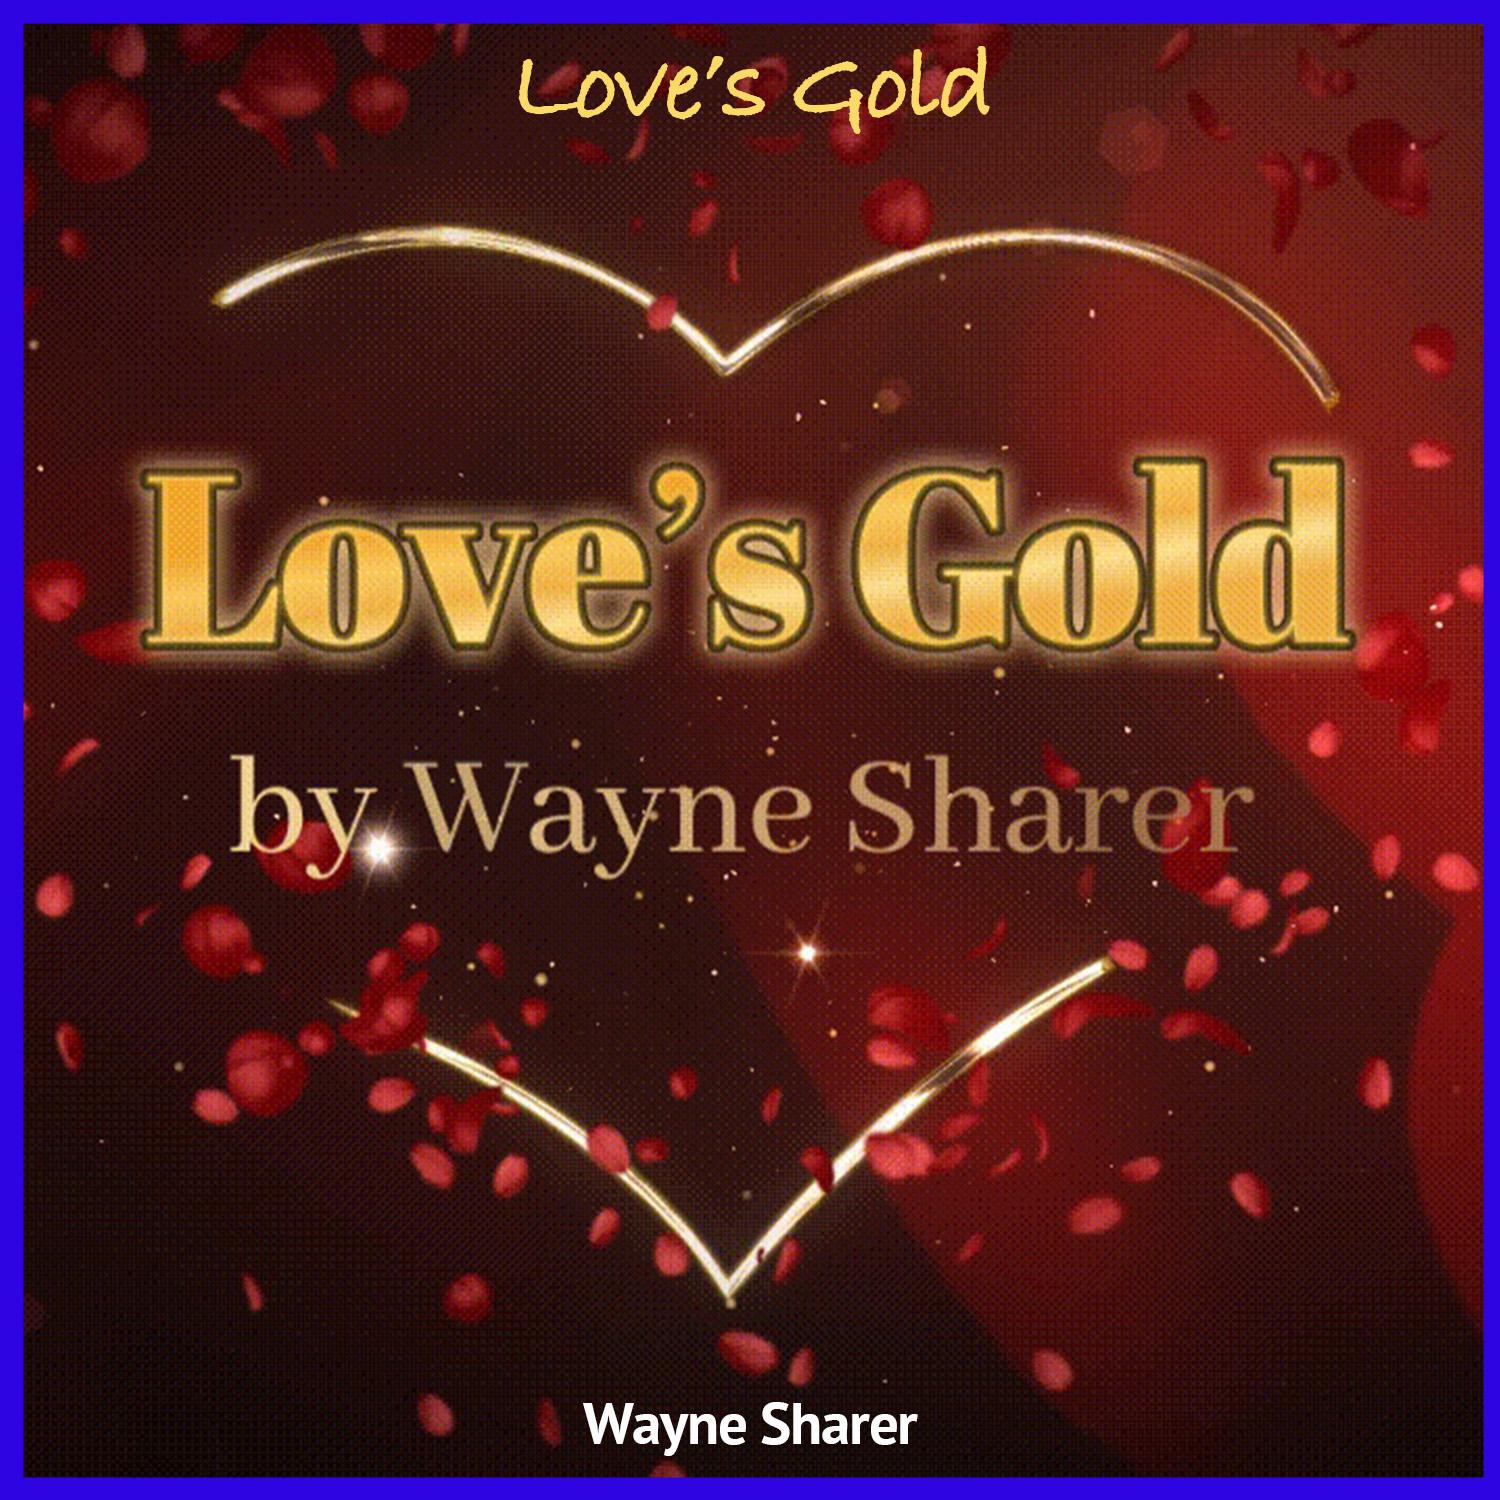 Love's Gold by Wayne Sharer, featuring the vocals of Marcello